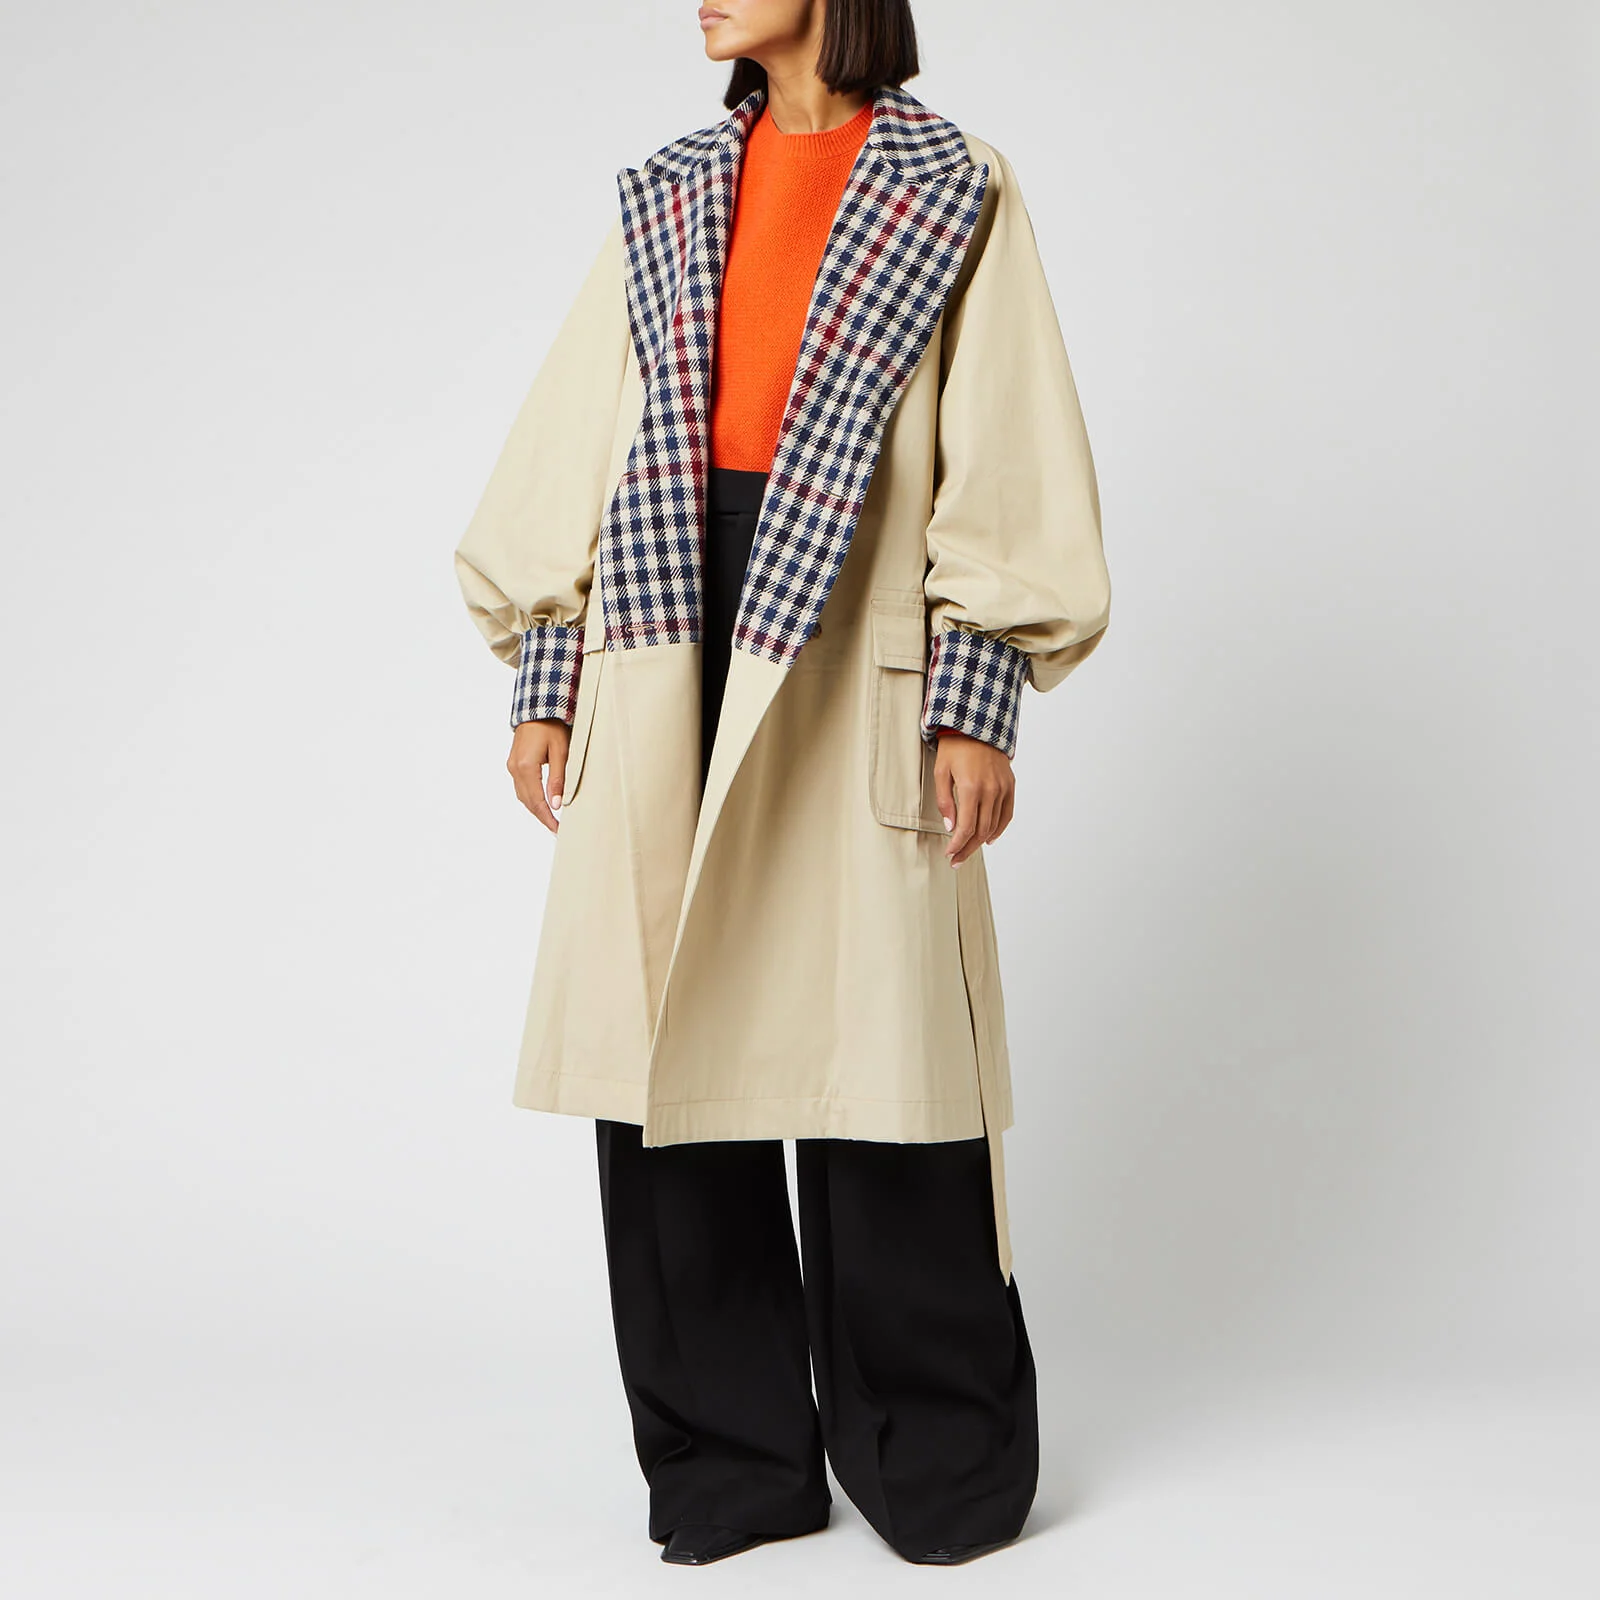 JW Anderson Women's Trench Coat with Check Contrast - Flax Image 1